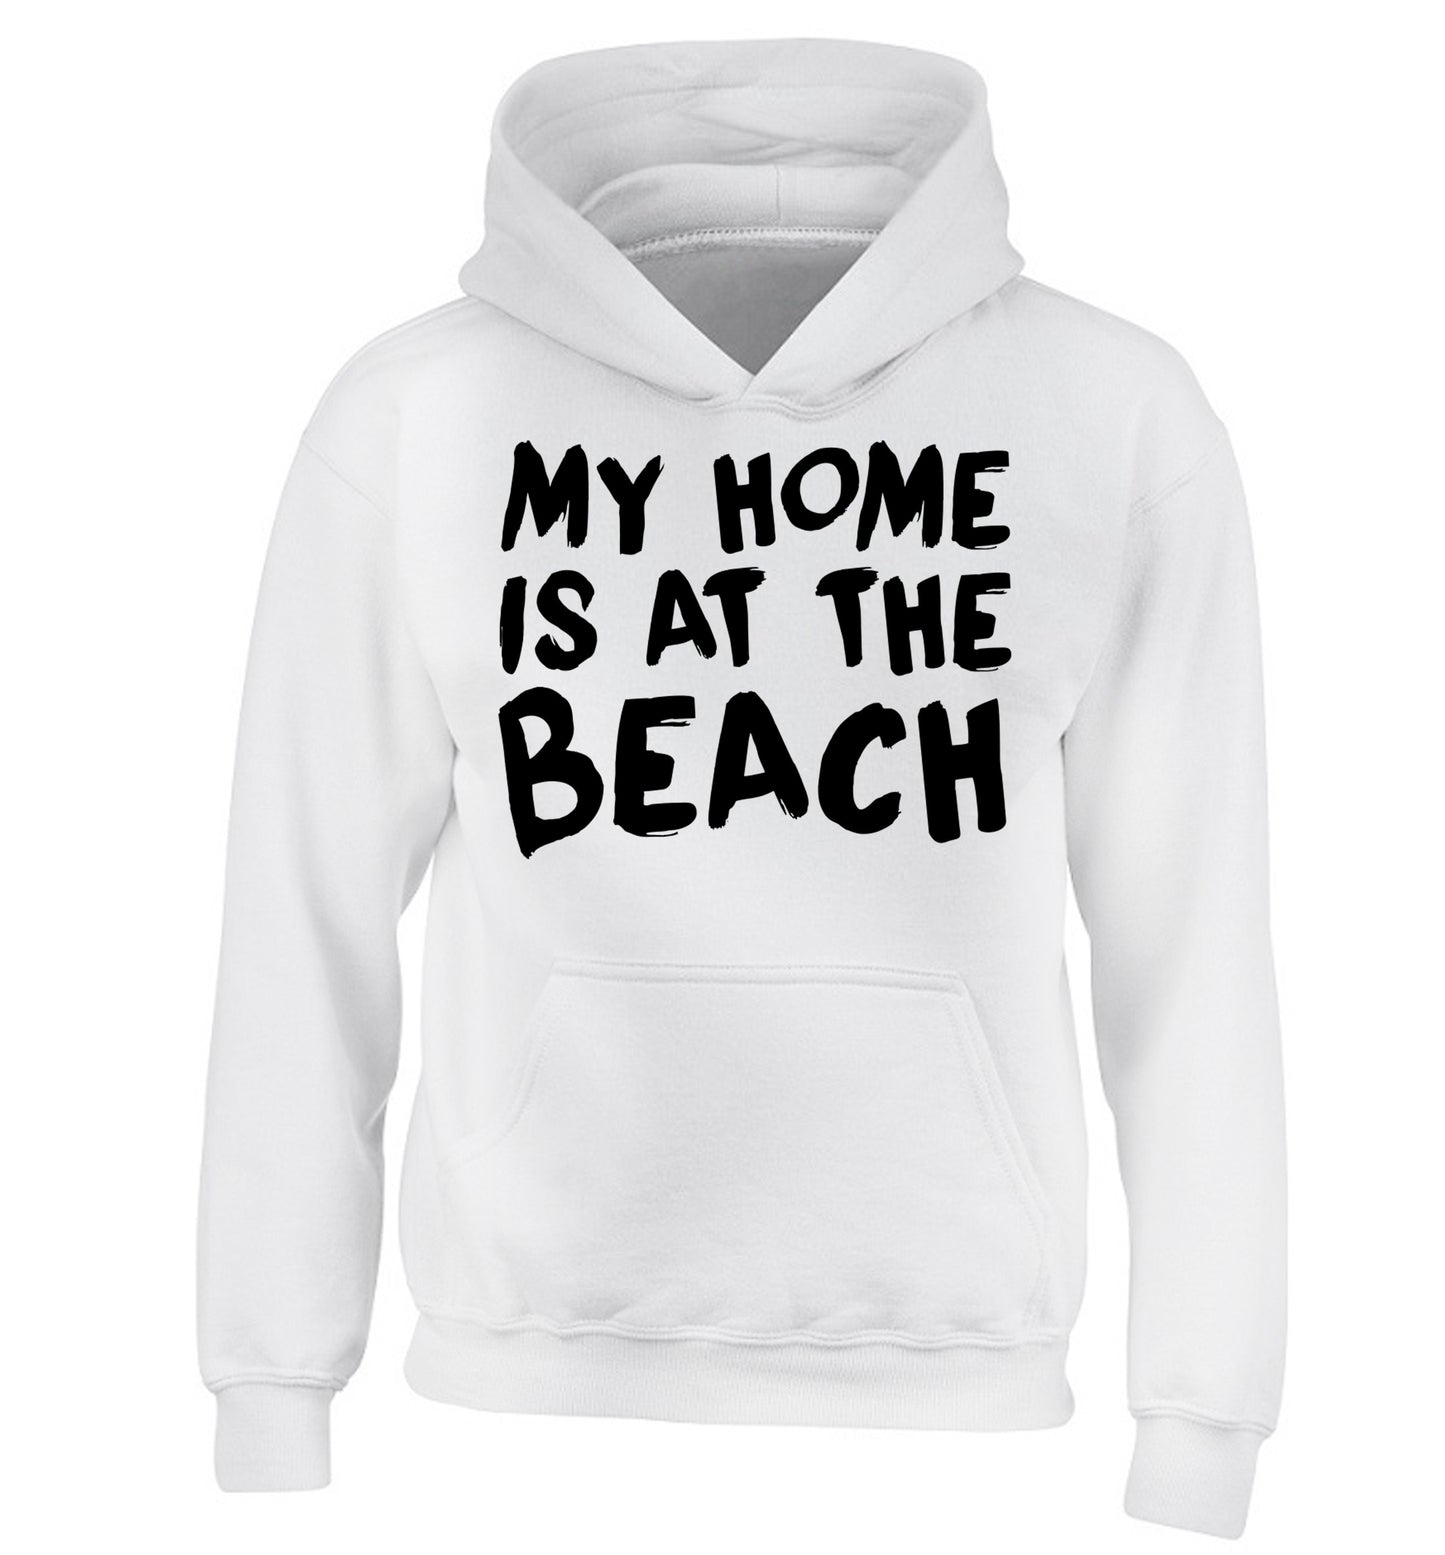 My home is at the beach children's white hoodie 12-14 Years